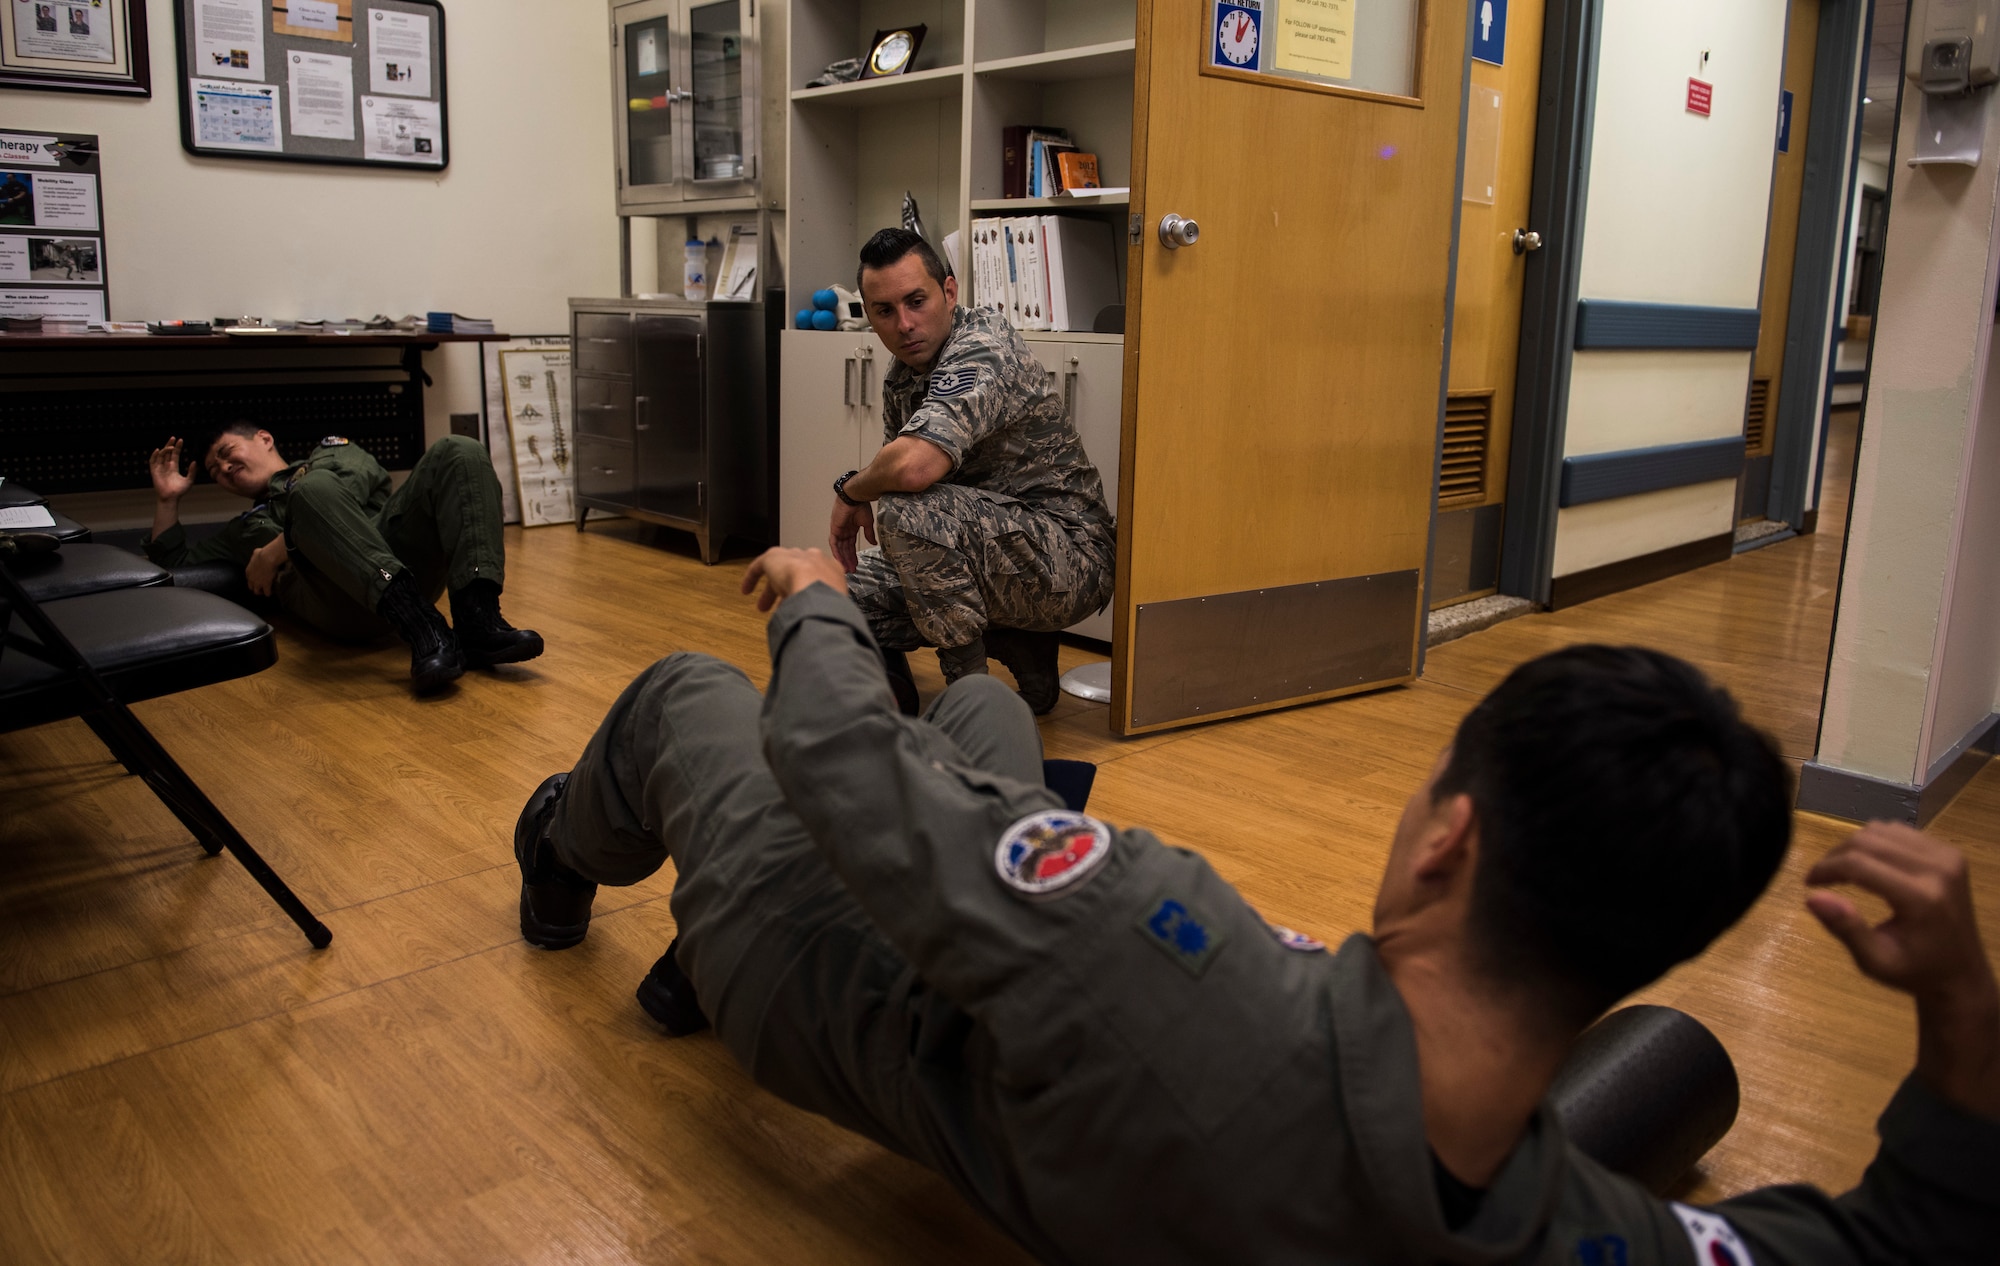 U.S. Air Force Tech. Sgt. David Spade, 8th Medical Operations Squadron physical therapy flight chief, shows pilots from the Republic of Korea Air Force’s 111th Fighter Squadron how to use a foam roller during a training session at Kunsan Air Base, Republic of Korea, Aug. 9, 2019. The 8th MDOS physical therapy flight taught the 111th FS pilots how to perform various stretches and exercises to alleviate pain and discomfort they were having. (U.S. Air Force photo by Senior Airman Stefan Alvarez)